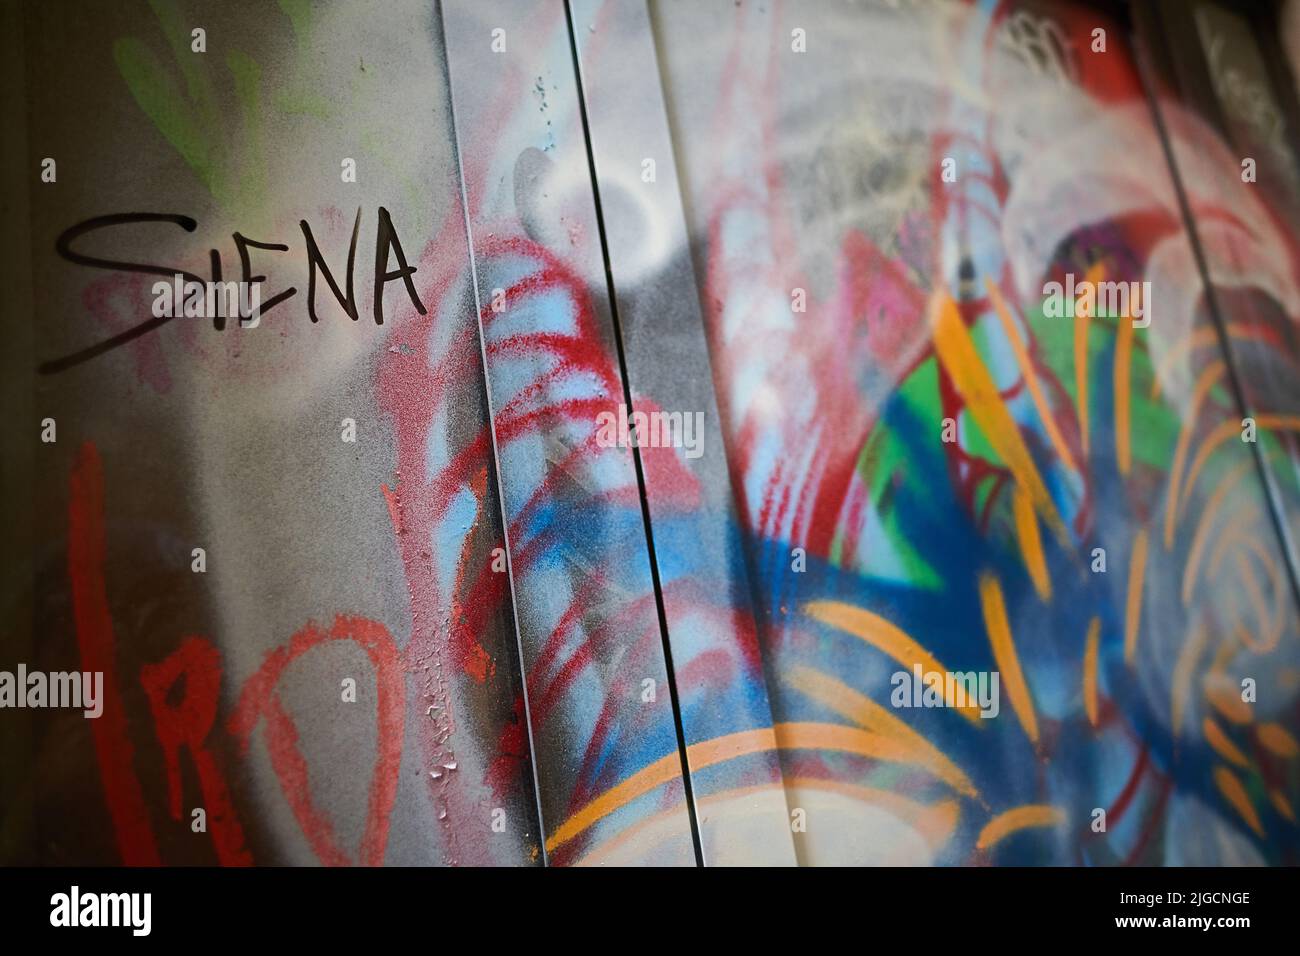 Graffiti tags on a wall and door Stock Photo